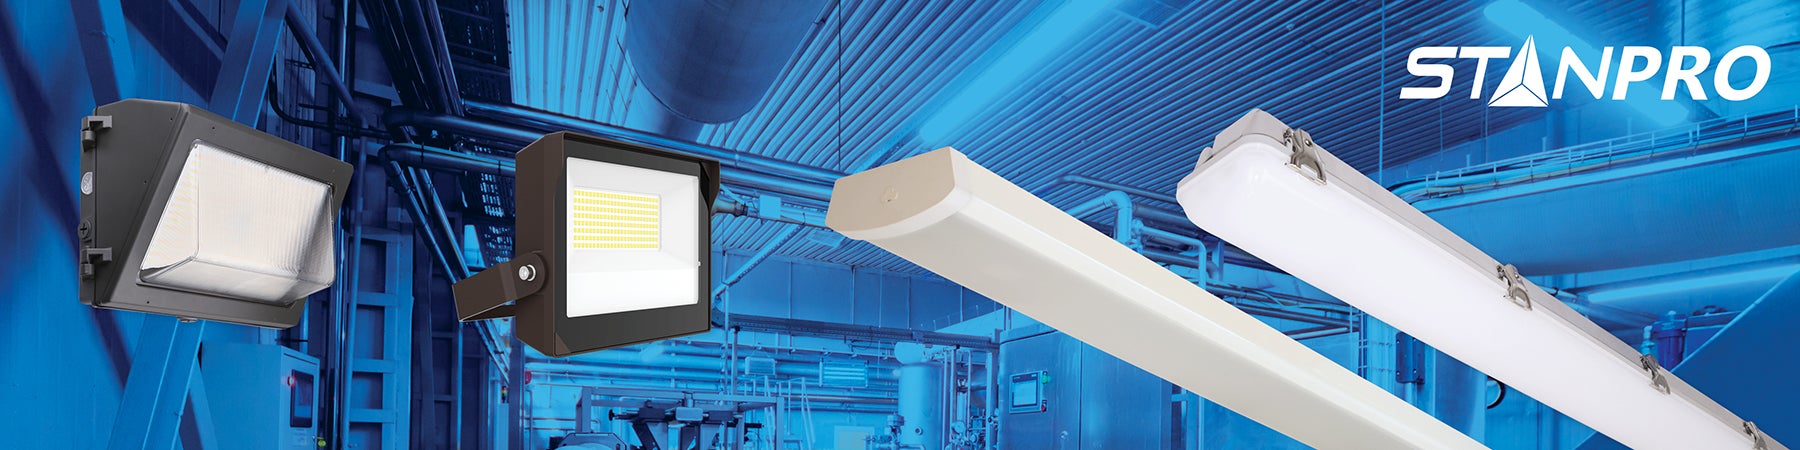 Stanpro - Shedding Light on DLC Premium Products: The Energy-Efficient Solution for Businesses